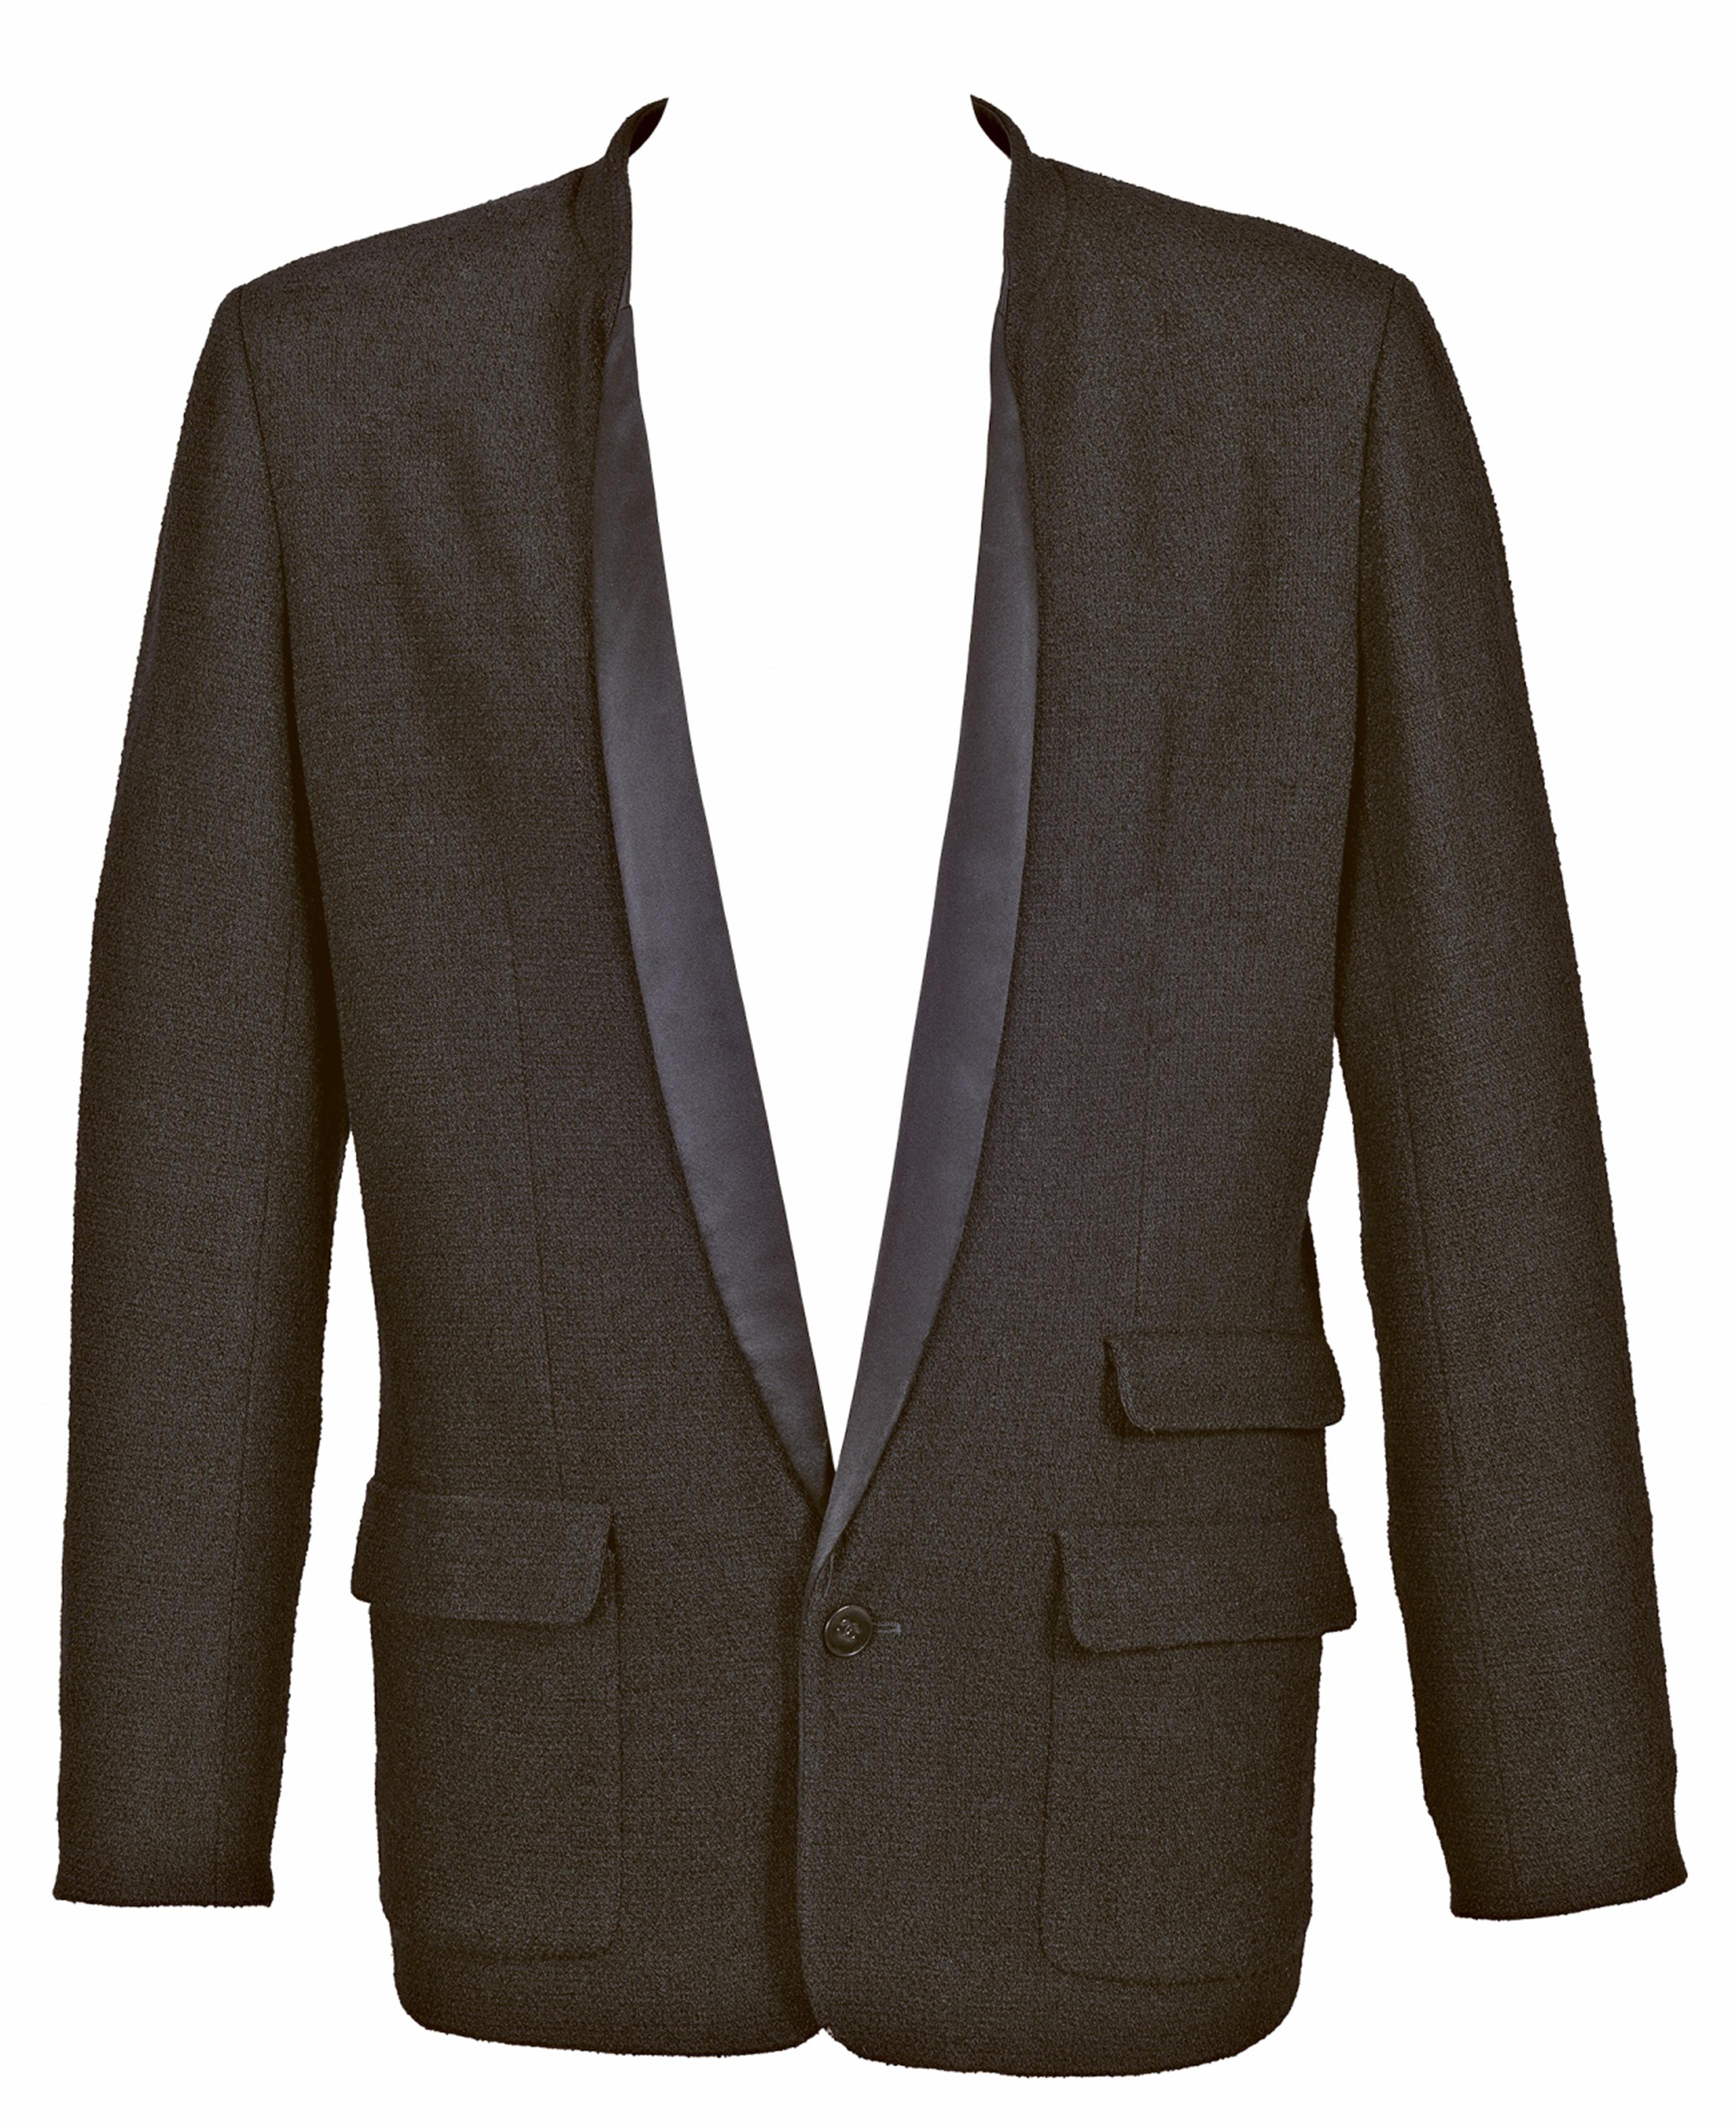 A Chanel dinner jacket, Autumn 2005 - image-1